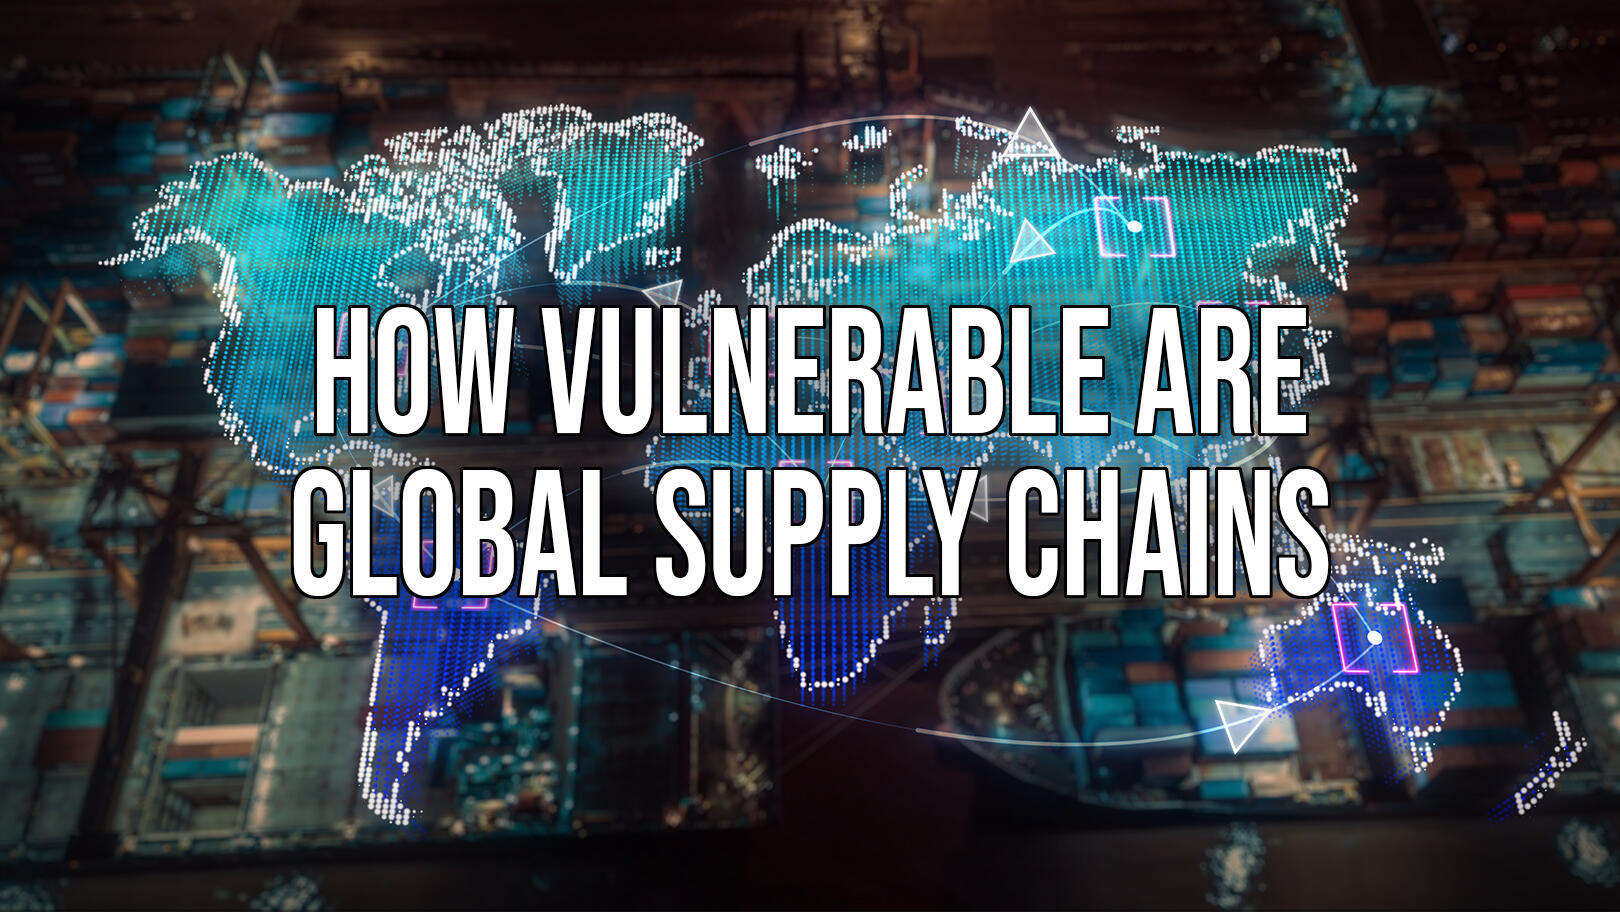 How vulnerable are global supply chains